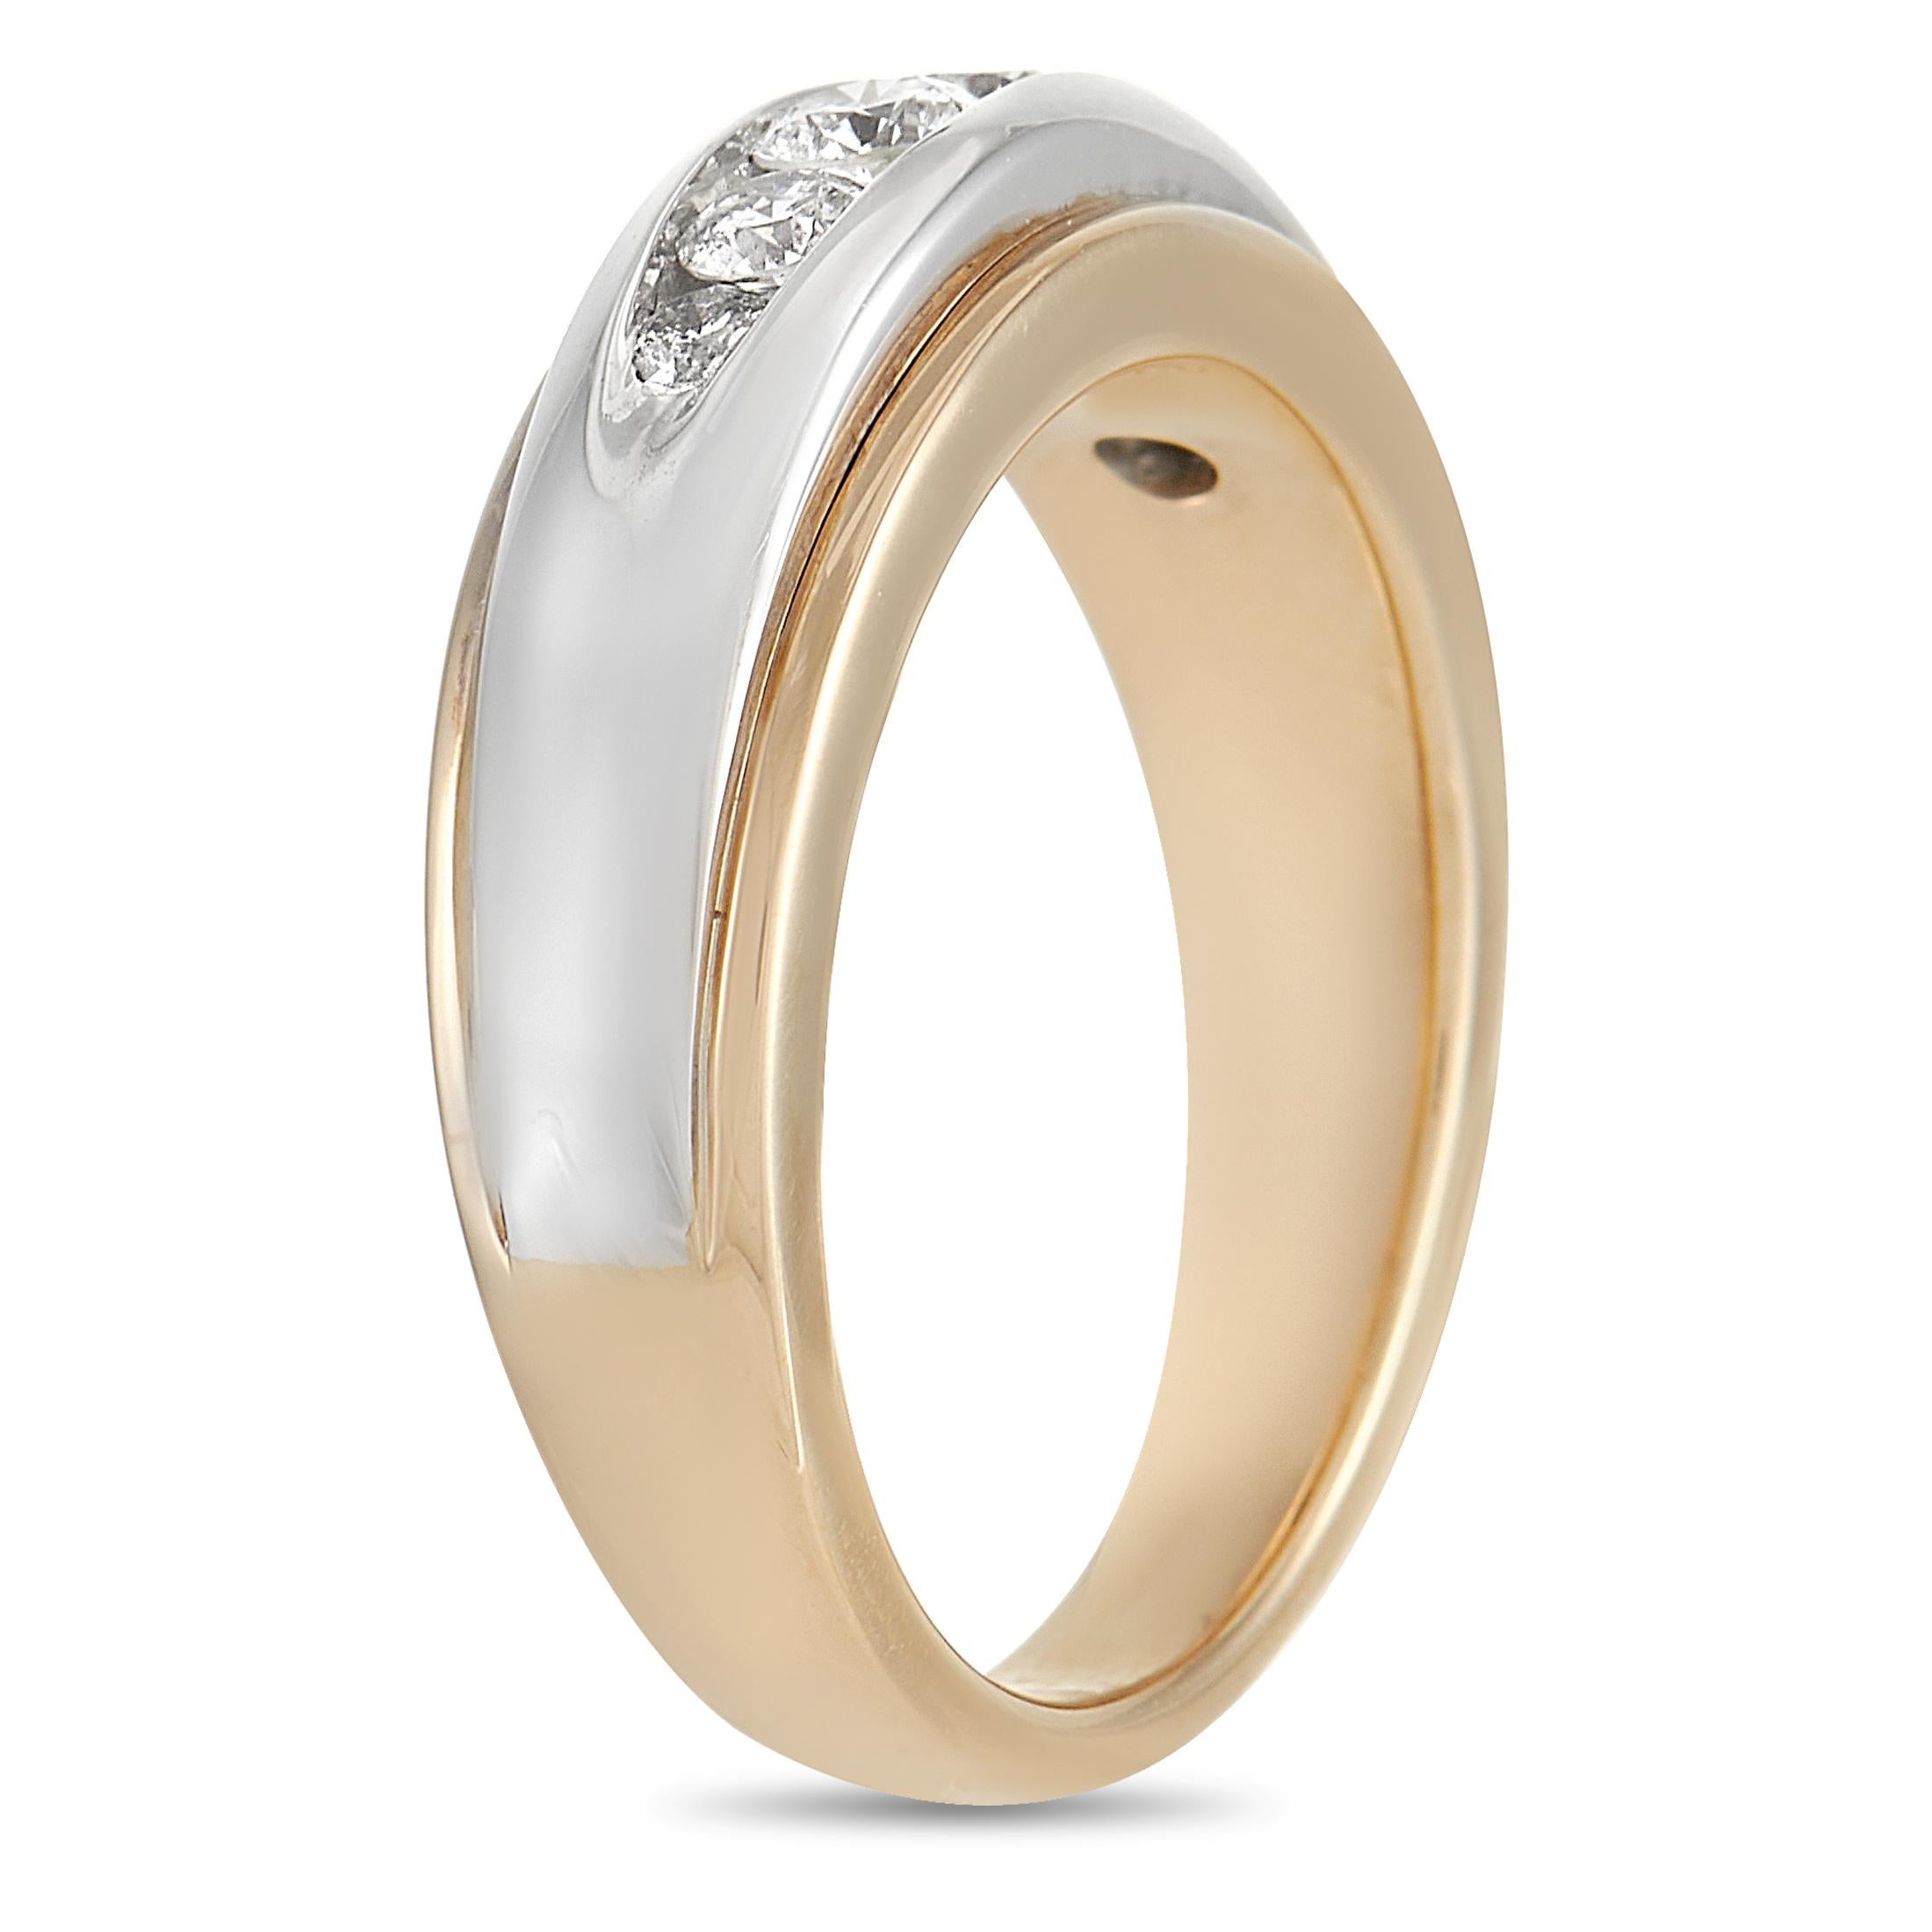 A streamlined, low-profile design gives this two-toned band ring a timeless sense of sophistication. Crafted from 14K yellow gold, an 14K white gold accent provides a striking contrast. At the center, you’ll also find 5 round-cut, dissimilarly sized